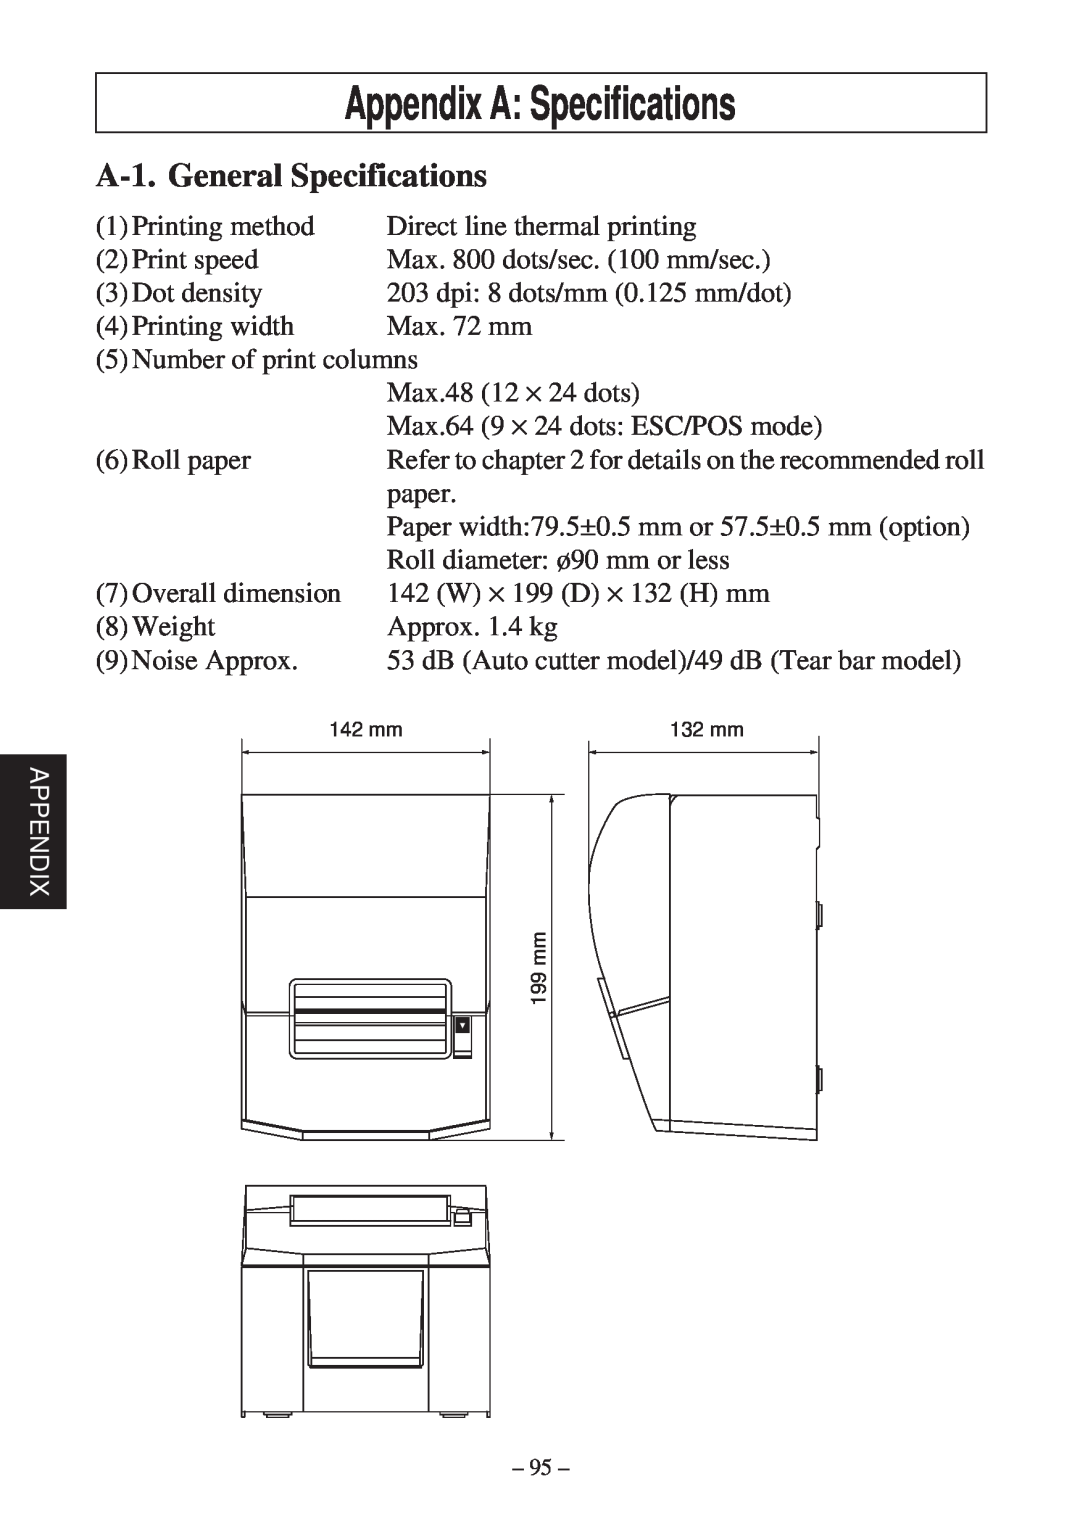 Star Micronics TSP600 user manual Appendix A Specifications, A-1. General Specifications 